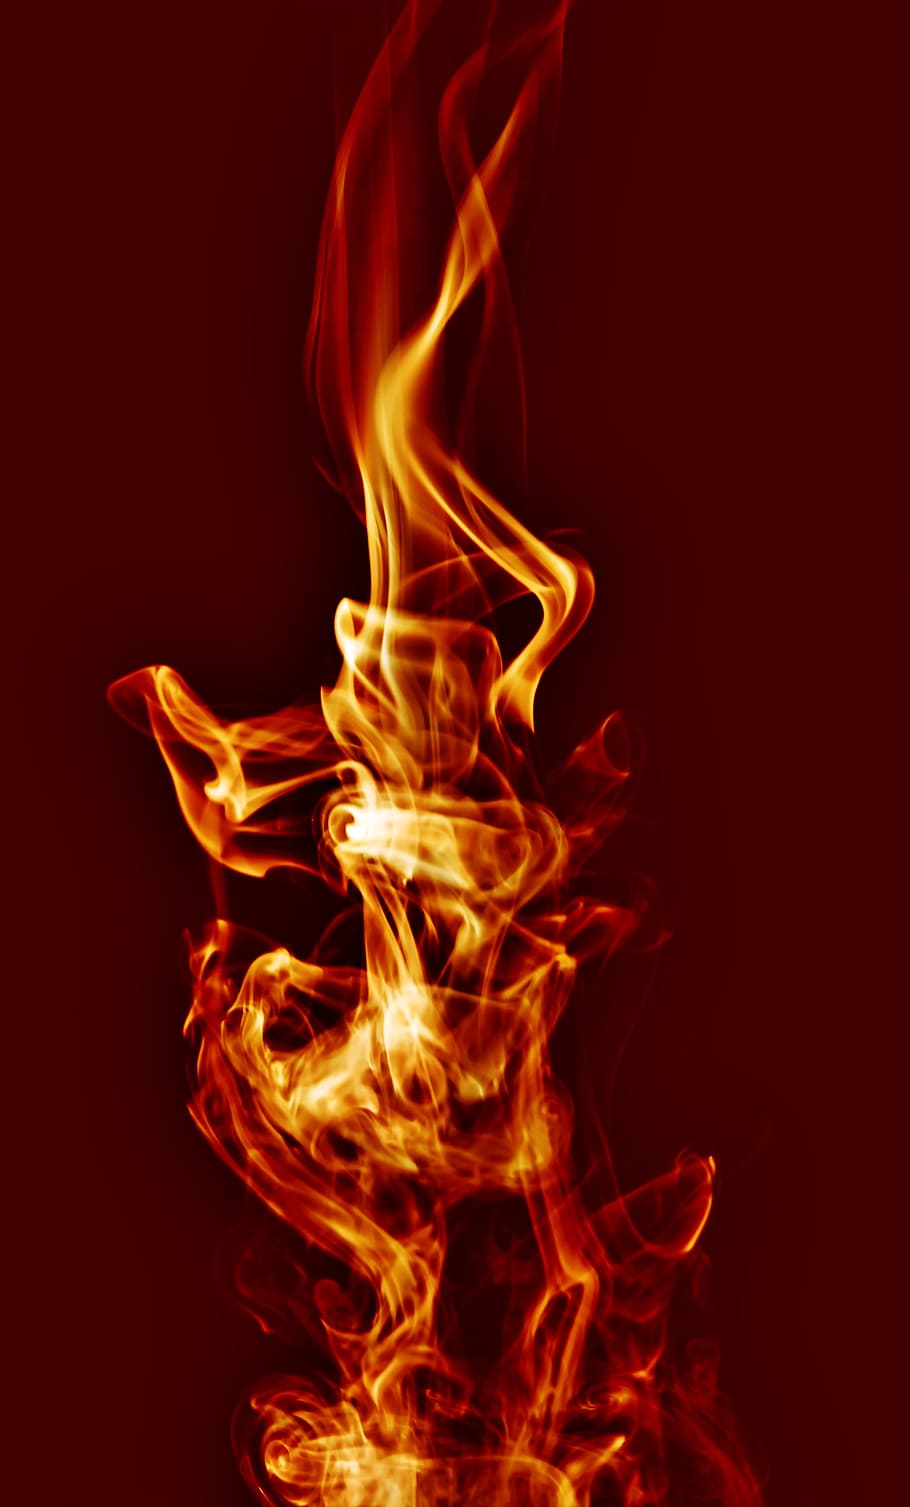 smoke, smell, color, aroma, abstract, background, aromatherapy, burning, fire, flame